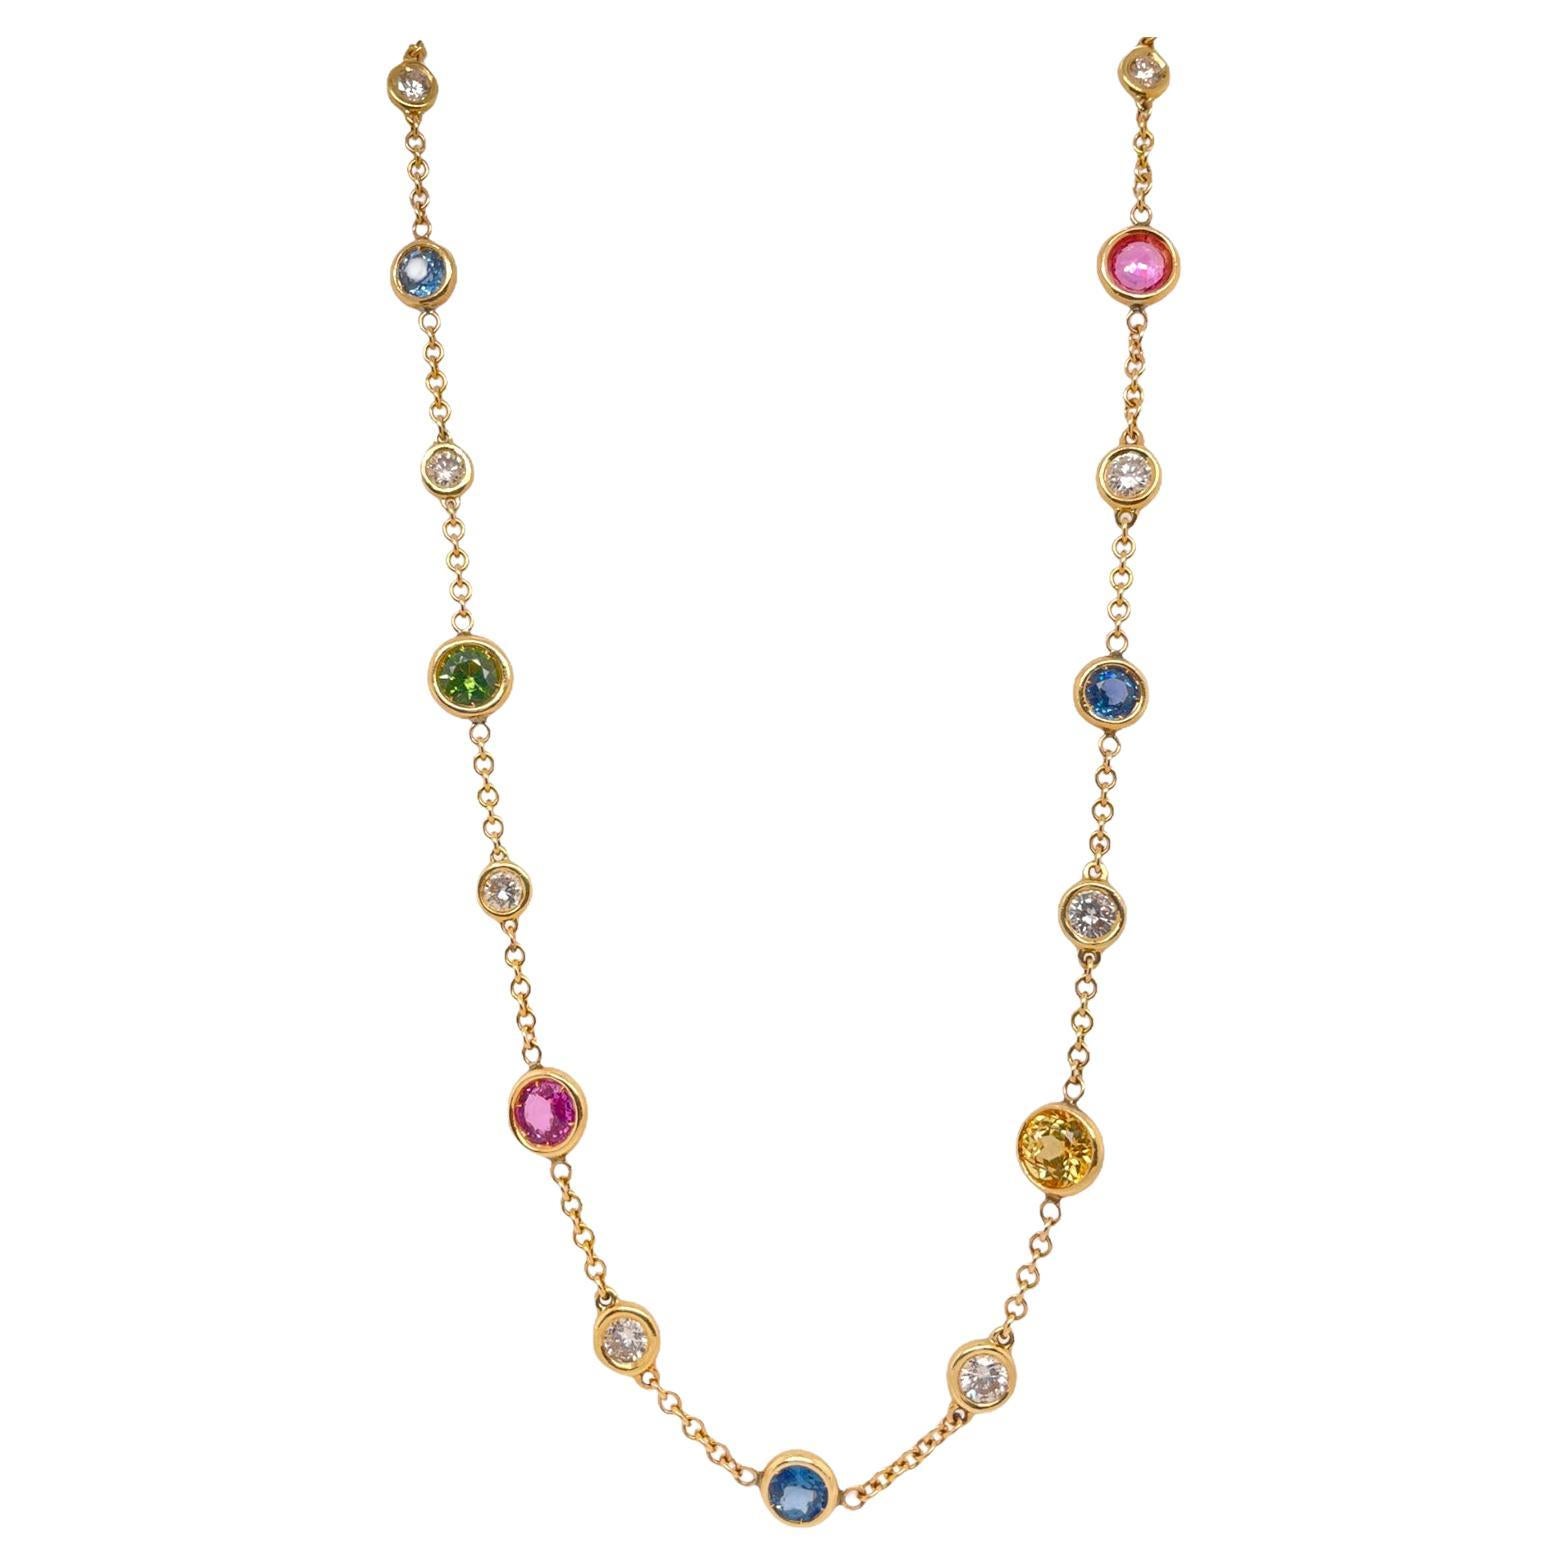 Multi color sapphire and diamond bezel set necklace in 14k yellow gold. Necklace contains round brilliant multi colored sapphires, 7.85tcw and round brilliant diamonds, 2.80tcw. Diamonds are near colorless and SI1 in clarity. Stones are all mounted